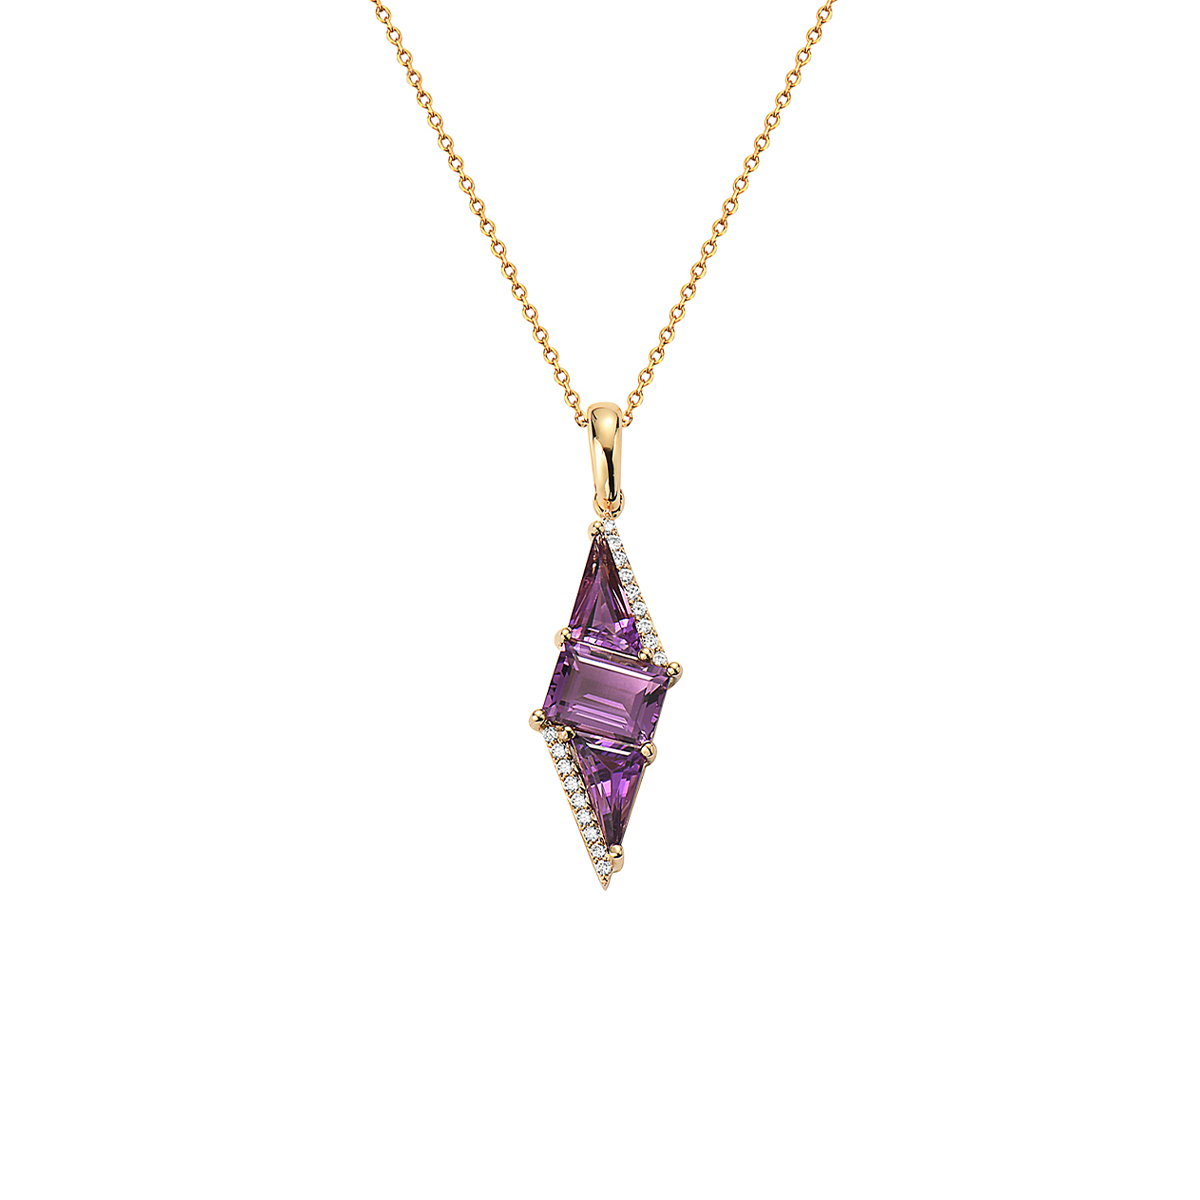 14K Yellow Gold Amethyst and Diamond Pendant with Chain